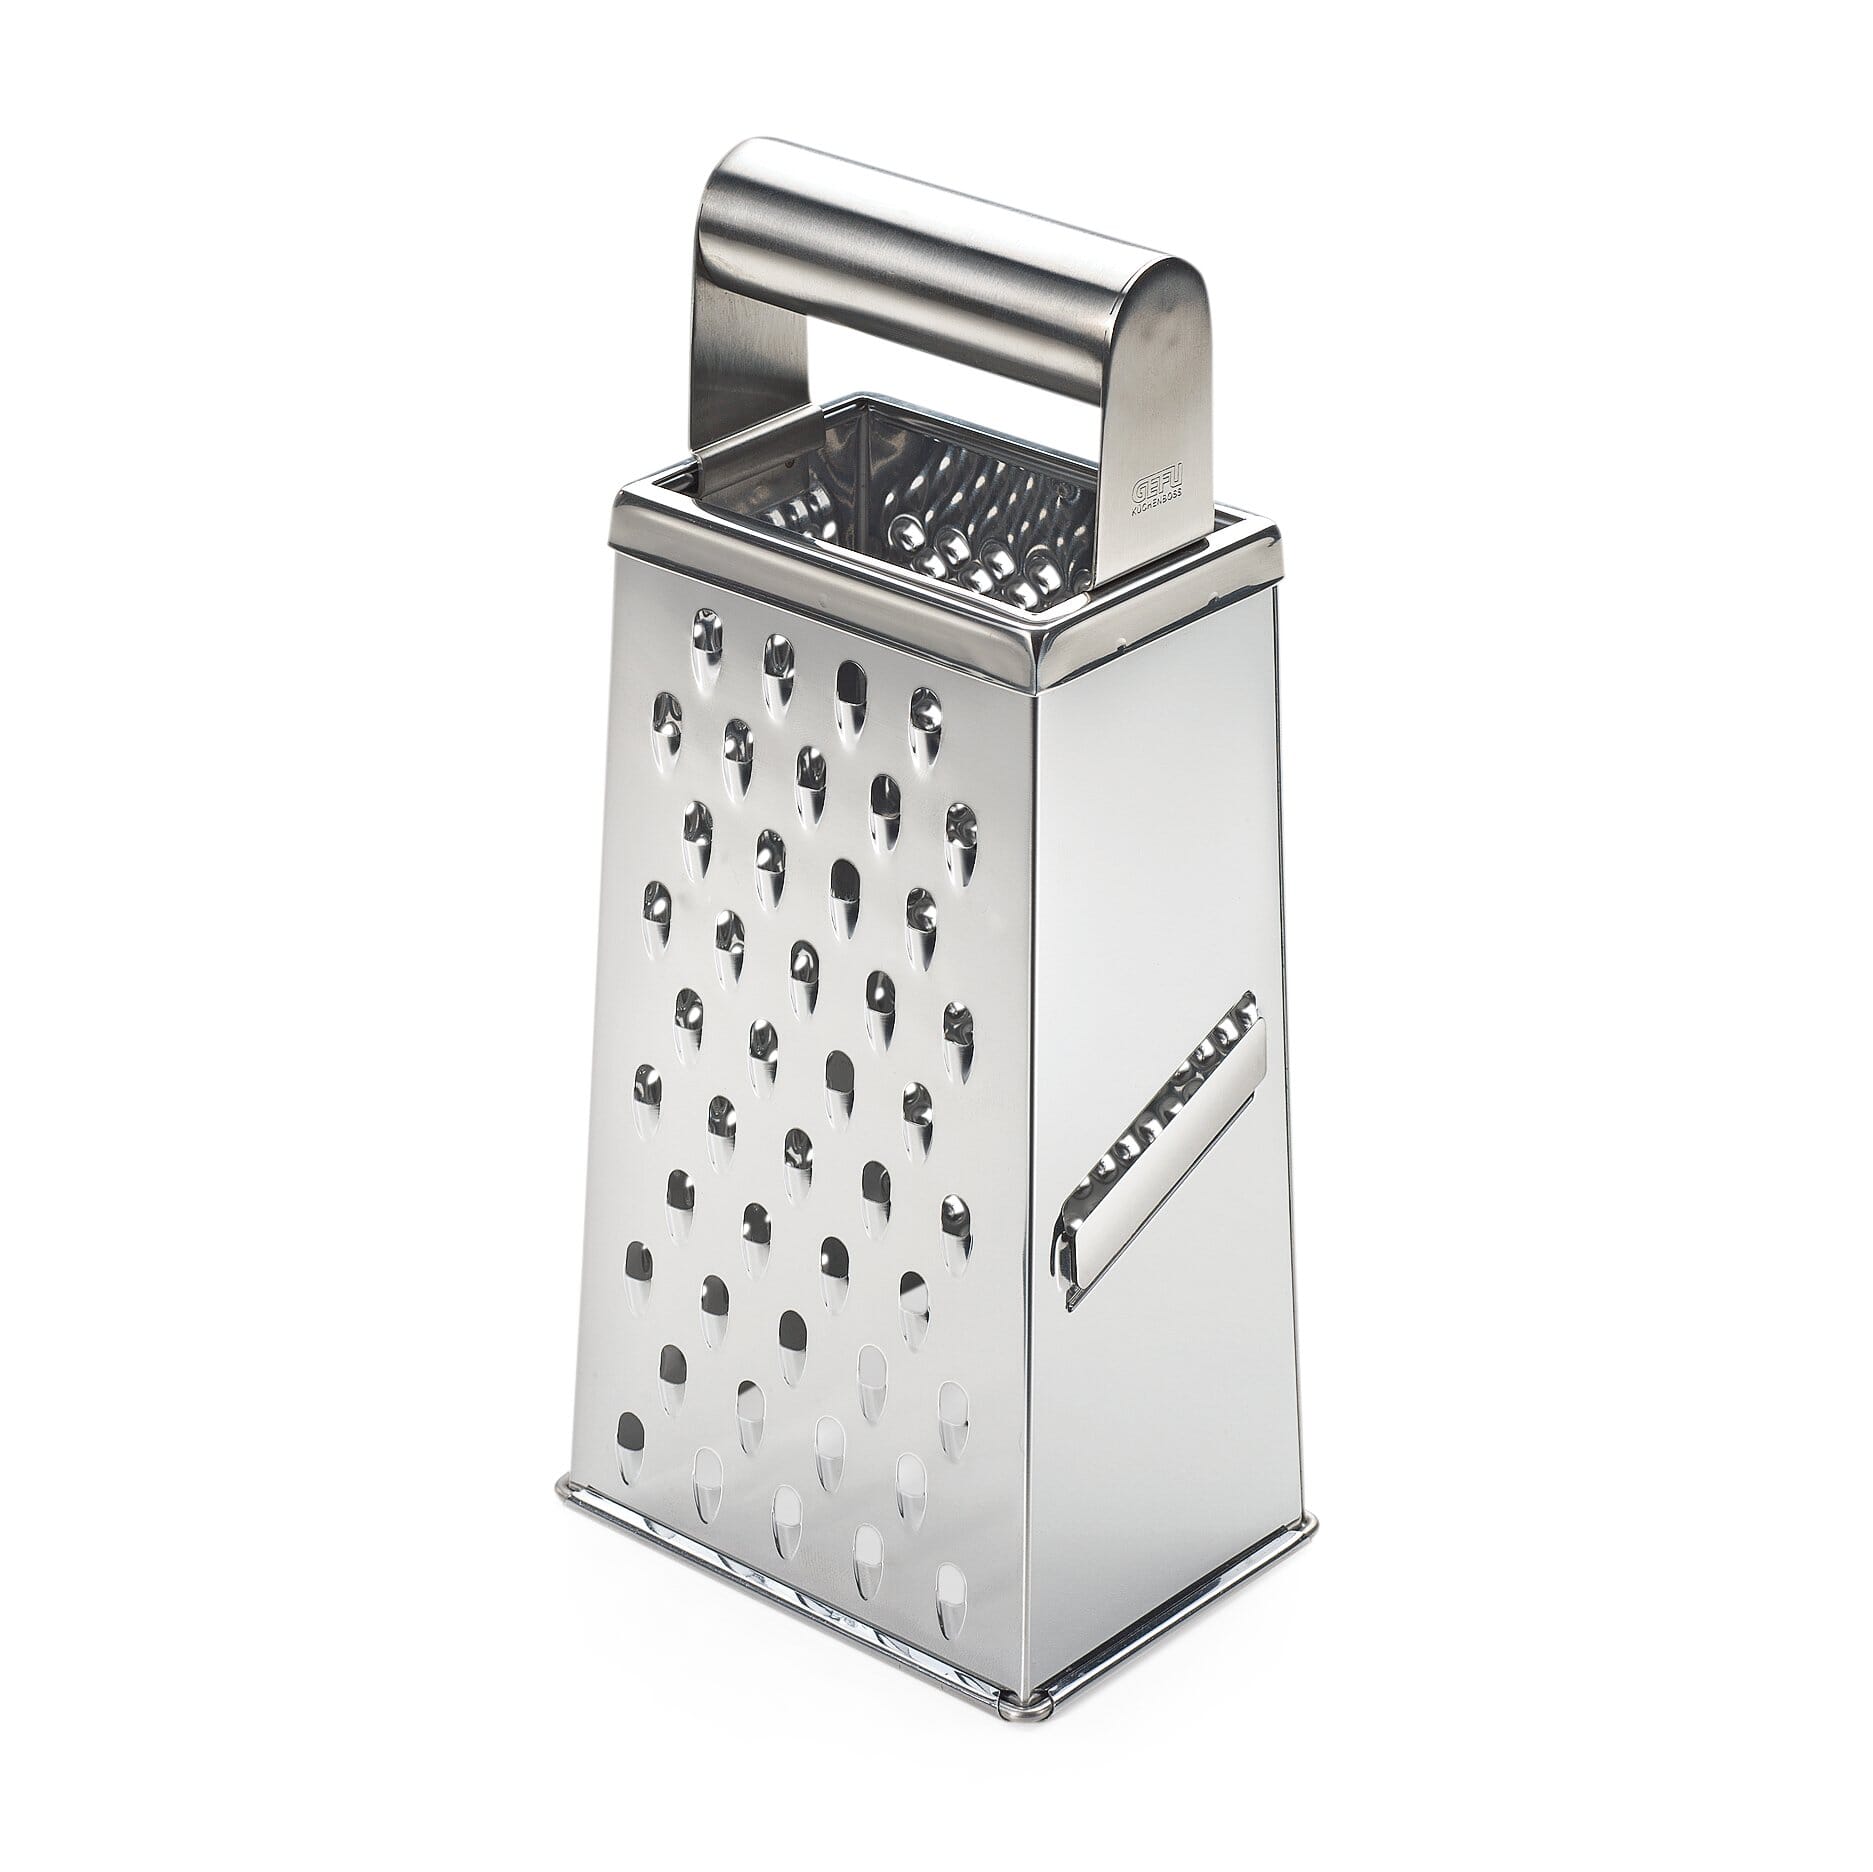 Stainless-Steel Grater